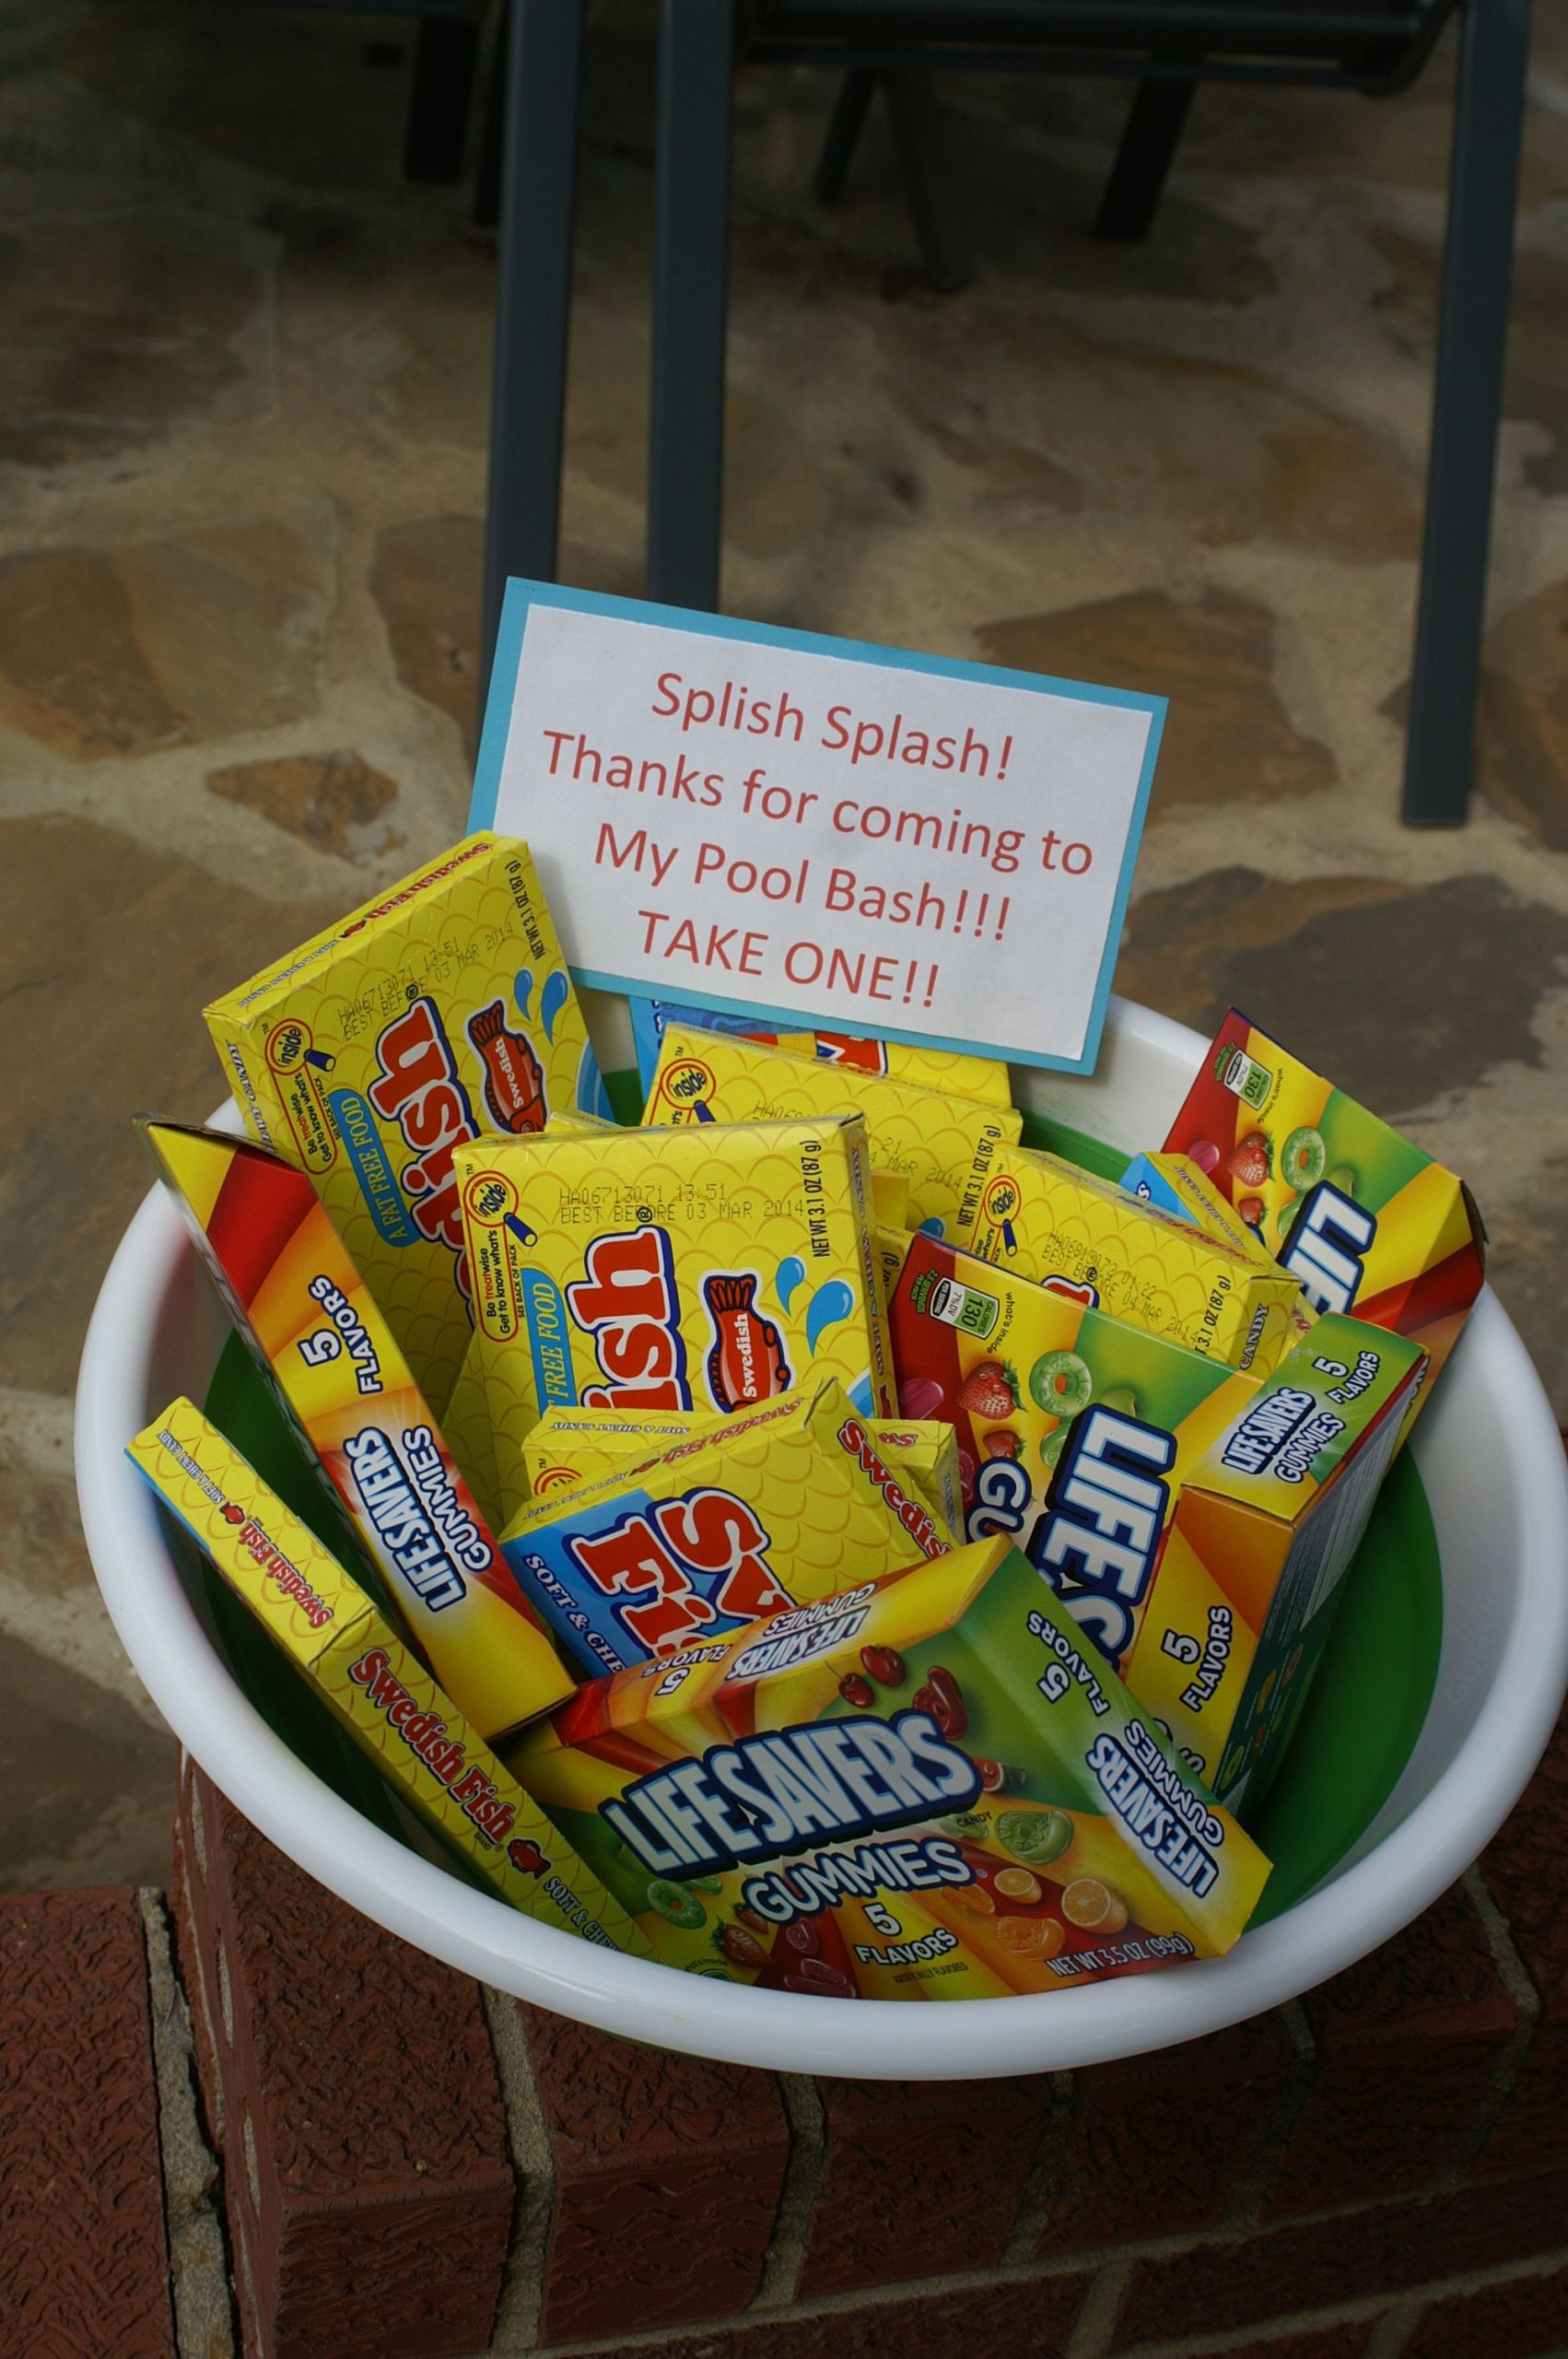 Backyard Beach Birthday Party Ideas
 party favors for pool beach party eping it simple